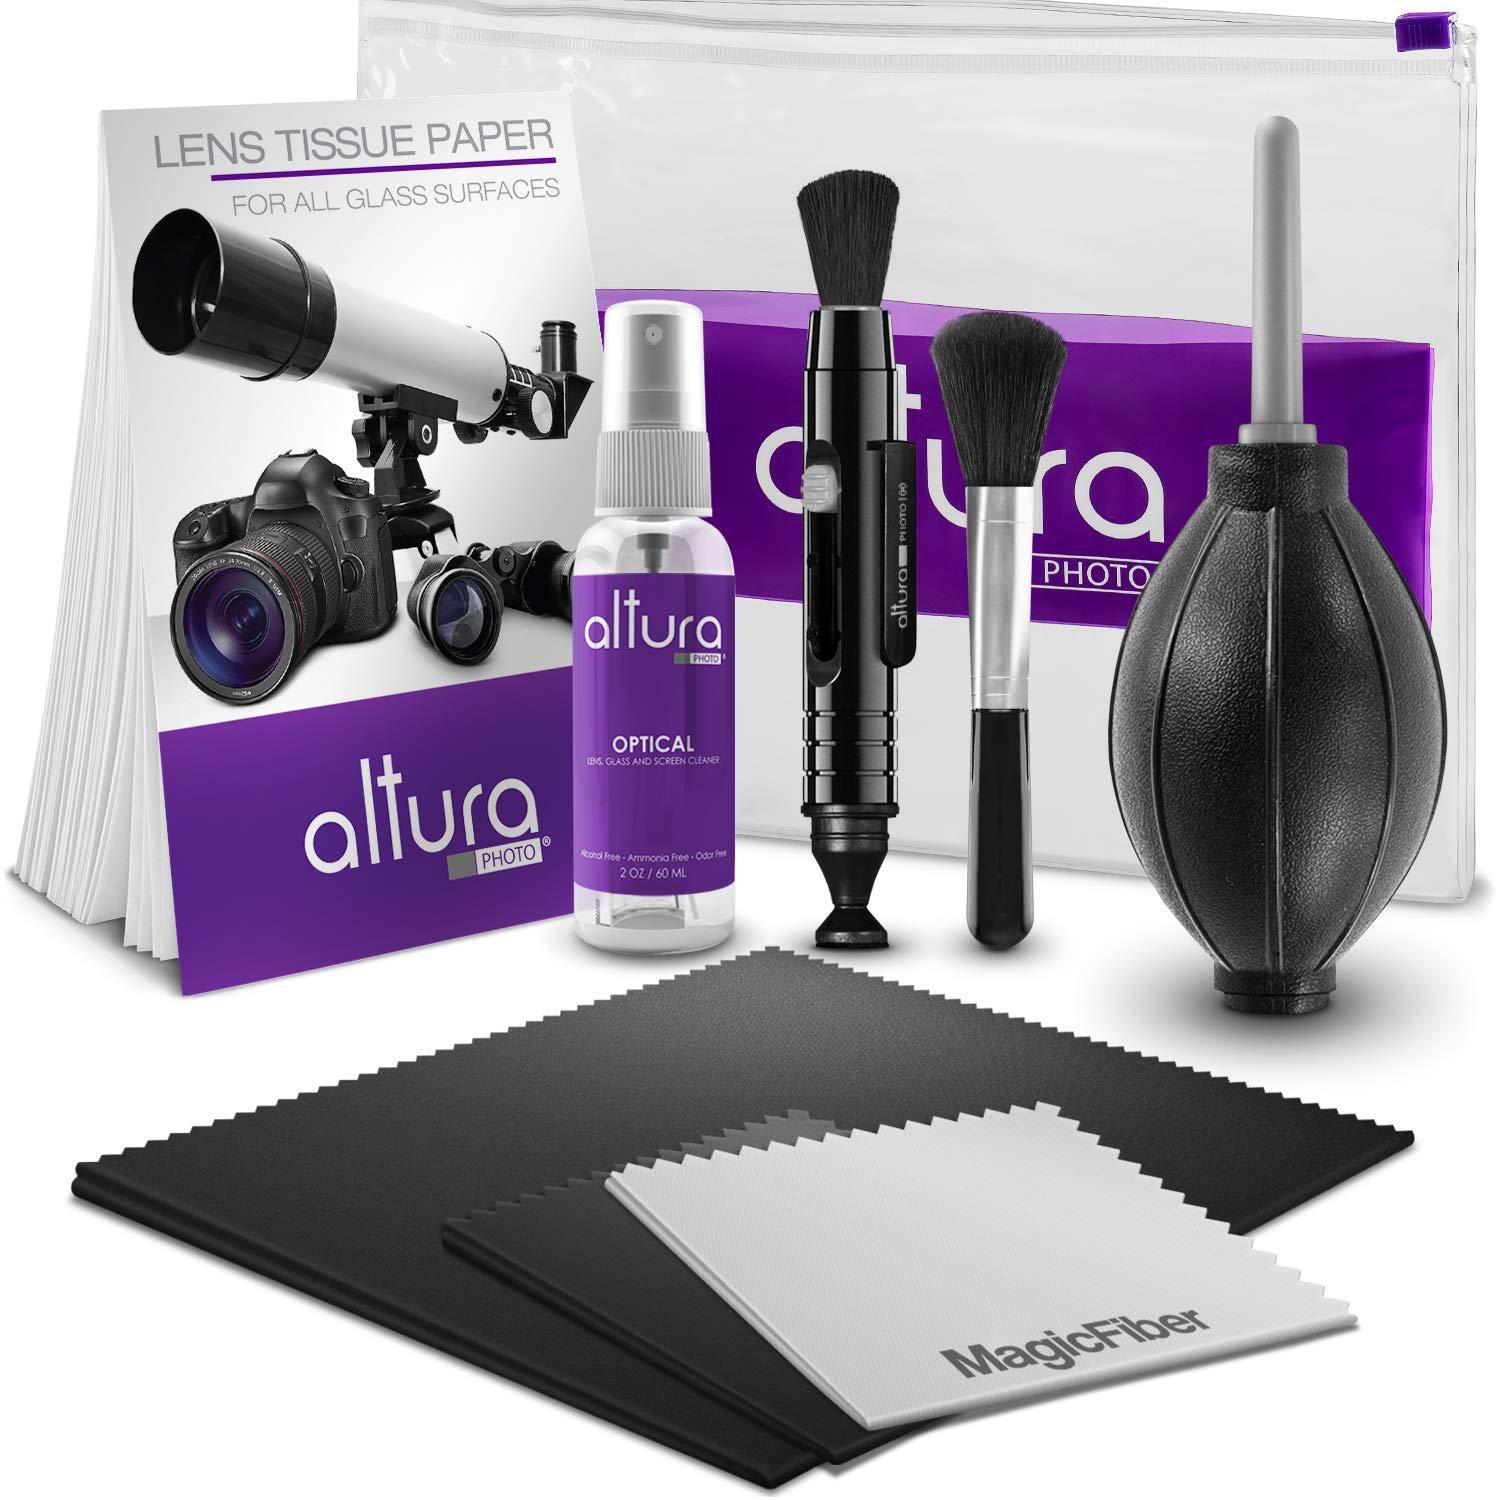 Altura Photo Professional Cleaning Kit fo20r DSLR Cameras and Sensitive Electronics Bundle with 2oz Altura Photo Spray Lens and LCD Cleaner